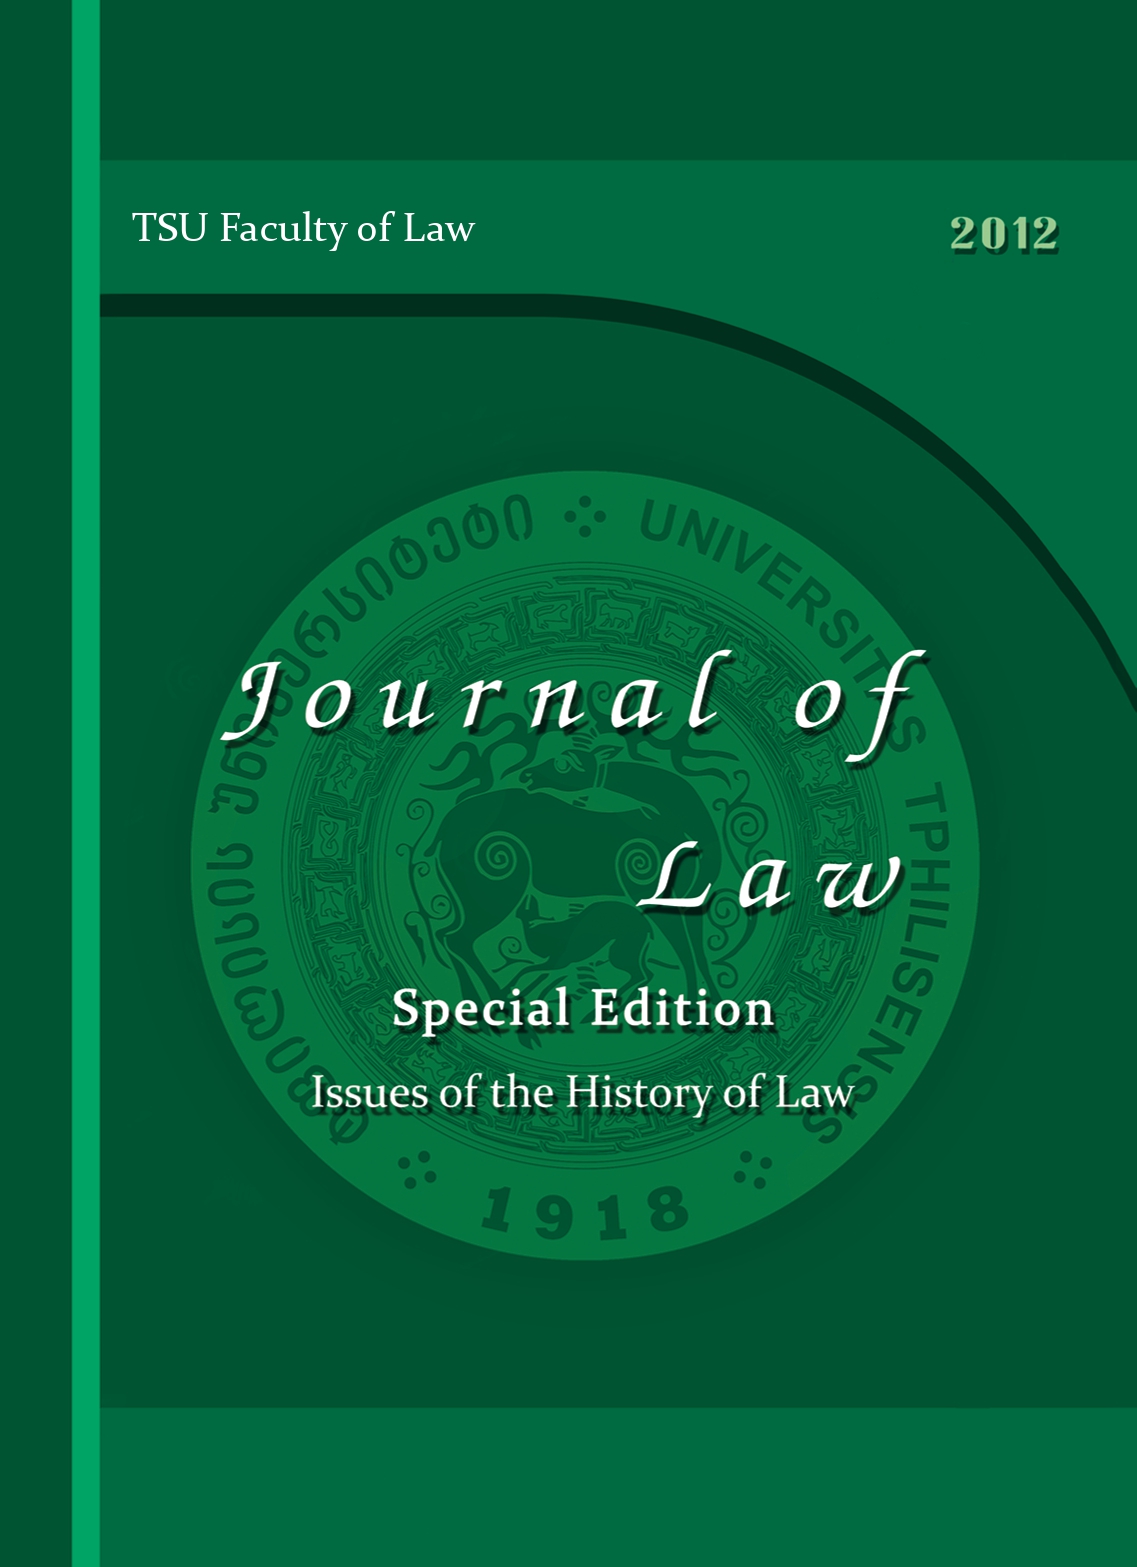 					View 2012: Journal of Law (Special Edition)
				